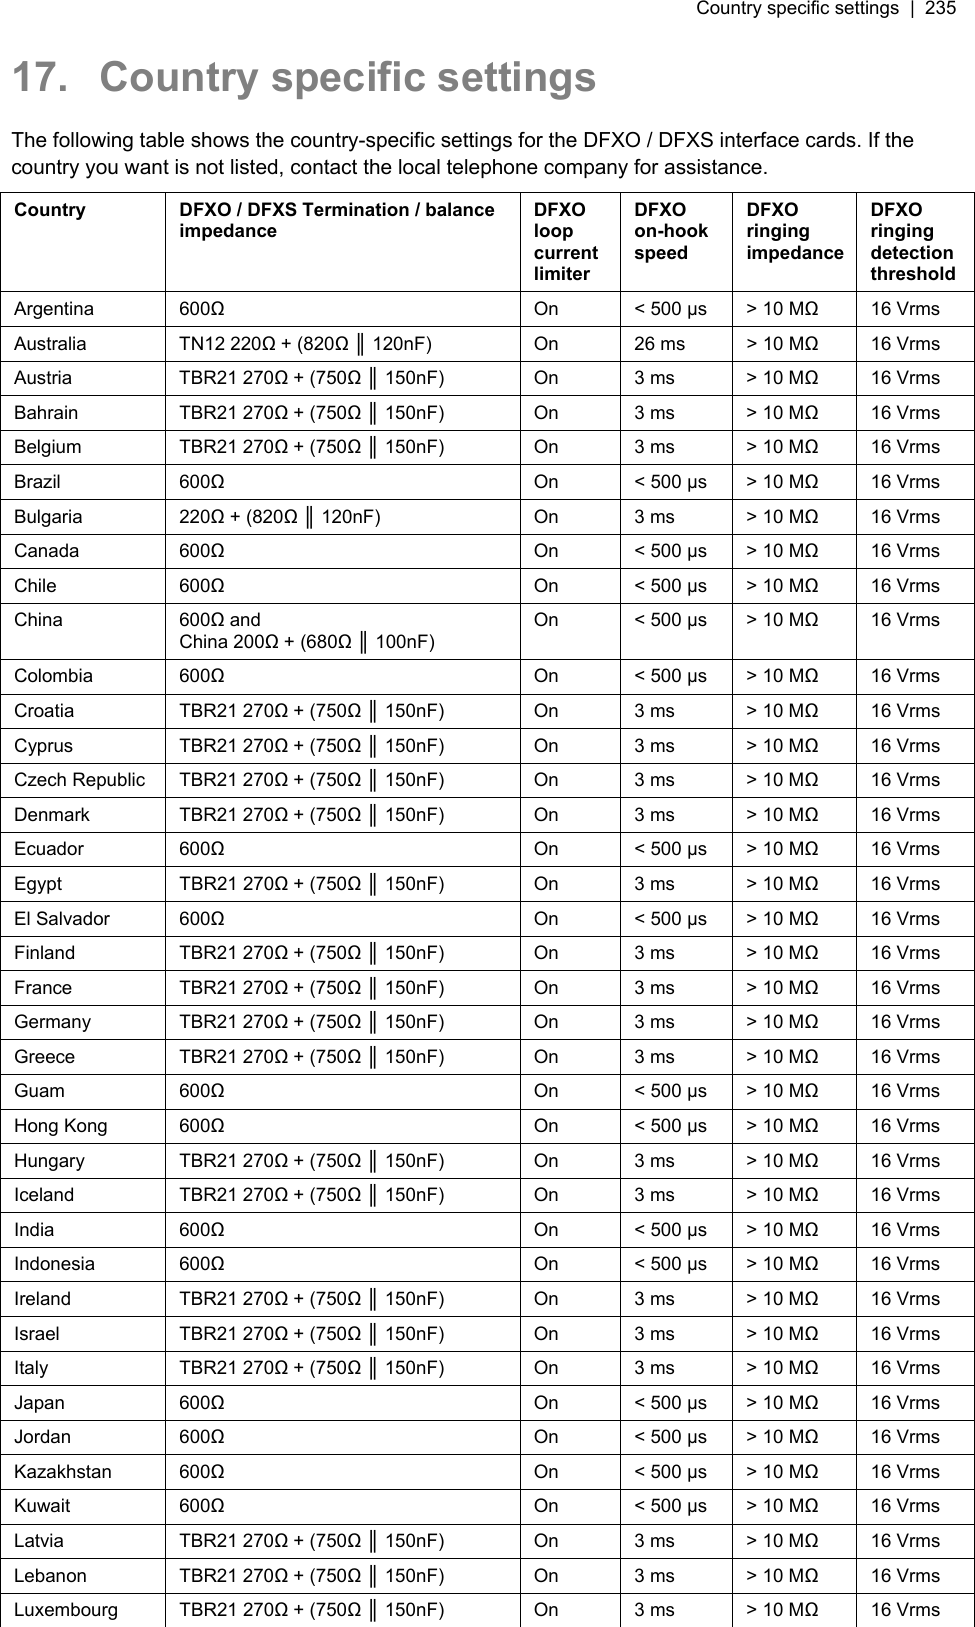 Country specific settings  |  235   17.  Country specific settings The following table shows the country-specific settings for the DFXO / DFXS interface cards. If the country you want is not listed, contact the local telephone company for assistance. Country  DFXO / DFXS Termination / balance impedance DFXO loop current limiter DFXO on-hook speed DFXO ringing impedance DFXO ringing detection threshold Argentina 600Ω On &lt; 500 μs  &gt; 10 MΩ 16 Vrms Australia TN12 220Ω + (820Ω ║ 120nF)  On  26 ms  &gt; 10 MΩ 16 Vrms Austria TBR21 270Ω + (750Ω ║ 150nF)  On  3 ms  &gt; 10 MΩ 16 Vrms Bahrain TBR21 270Ω + (750Ω ║ 150nF)  On  3 ms  &gt; 10 MΩ 16 Vrms Belgium TBR21 270Ω + (750Ω ║ 150nF)  On  3 ms  &gt; 10 MΩ 16 Vrms Brazil 600Ω On &lt; 500 μs  &gt; 10 MΩ 16 Vrms Bulgaria 220Ω + (820Ω ║ 120nF)  On  3 ms  &gt; 10 MΩ 16 Vrms Canada 600Ω On &lt; 500 μs  &gt; 10 MΩ 16 Vrms Chile 600Ω On &lt; 500 μs  &gt; 10 MΩ 16 Vrms China 600Ω and China 200Ω + (680Ω ║ 100nF) On &lt; 500 μs  &gt; 10 MΩ 16 Vrms Colombia 600Ω On &lt; 500 μs  &gt; 10 MΩ 16 Vrms Croatia   TBR21 270Ω + (750Ω ║ 150nF)  On  3 ms  &gt; 10 MΩ 16 Vrms Cyprus TBR21 270Ω + (750Ω ║ 150nF)  On  3 ms  &gt; 10 MΩ 16 Vrms Czech Republic  TBR21 270Ω + (750Ω ║ 150nF)  On  3 ms  &gt; 10 MΩ 16 Vrms Denmark TBR21 270Ω + (750Ω ║ 150nF)  On  3 ms  &gt; 10 MΩ 16 Vrms Ecuador 600Ω On &lt; 500 μs  &gt; 10 MΩ 16 Vrms Egypt TBR21 270Ω + (750Ω ║ 150nF)  On  3 ms  &gt; 10 MΩ 16 Vrms El Salvador   600Ω On &lt; 500 μs  &gt; 10 MΩ 16 Vrms Finland TBR21 270Ω + (750Ω ║ 150nF)  On  3 ms  &gt; 10 MΩ 16 Vrms France TBR21 270Ω + (750Ω ║ 150nF)  On  3 ms  &gt; 10 MΩ 16 Vrms Germany TBR21 270Ω + (750Ω ║ 150nF)  On  3 ms  &gt; 10 MΩ 16 Vrms Greece TBR21 270Ω + (750Ω ║ 150nF)  On  3 ms  &gt; 10 MΩ 16 Vrms Guam 600Ω On &lt; 500 μs  &gt; 10 MΩ 16 Vrms Hong Kong  600Ω On &lt; 500 μs  &gt; 10 MΩ 16 Vrms Hungary TBR21 270Ω + (750Ω ║ 150nF)  On  3 ms  &gt; 10 MΩ 16 Vrms Iceland TBR21 270Ω + (750Ω ║ 150nF)  On  3 ms  &gt; 10 MΩ 16 Vrms India   600Ω On &lt; 500 μs  &gt; 10 MΩ 16 Vrms Indonesia   600Ω On &lt; 500 μs  &gt; 10 MΩ 16 Vrms Ireland   TBR21 270Ω + (750Ω ║ 150nF)  On  3 ms  &gt; 10 MΩ 16 Vrms Israel   TBR21 270Ω + (750Ω ║ 150nF)  On  3 ms  &gt; 10 MΩ 16 Vrms Italy   TBR21 270Ω + (750Ω ║ 150nF)  On  3 ms  &gt; 10 MΩ 16 Vrms Japan   600Ω On &lt; 500 μs  &gt; 10 MΩ 16 Vrms Jordan   600Ω On &lt; 500 μs  &gt; 10 MΩ 16 Vrms Kazakhstan   600Ω On &lt; 500 μs  &gt; 10 MΩ 16 Vrms Kuwait   600Ω On &lt; 500 μs  &gt; 10 MΩ 16 Vrms Latvia   TBR21 270Ω + (750Ω ║ 150nF)  On  3 ms  &gt; 10 MΩ 16 Vrms Lebanon   TBR21 270Ω + (750Ω ║ 150nF)  On  3 ms  &gt; 10 MΩ 16 Vrms Luxembourg   TBR21 270Ω + (750Ω ║ 150nF)  On  3 ms  &gt; 10 MΩ 16 Vrms 